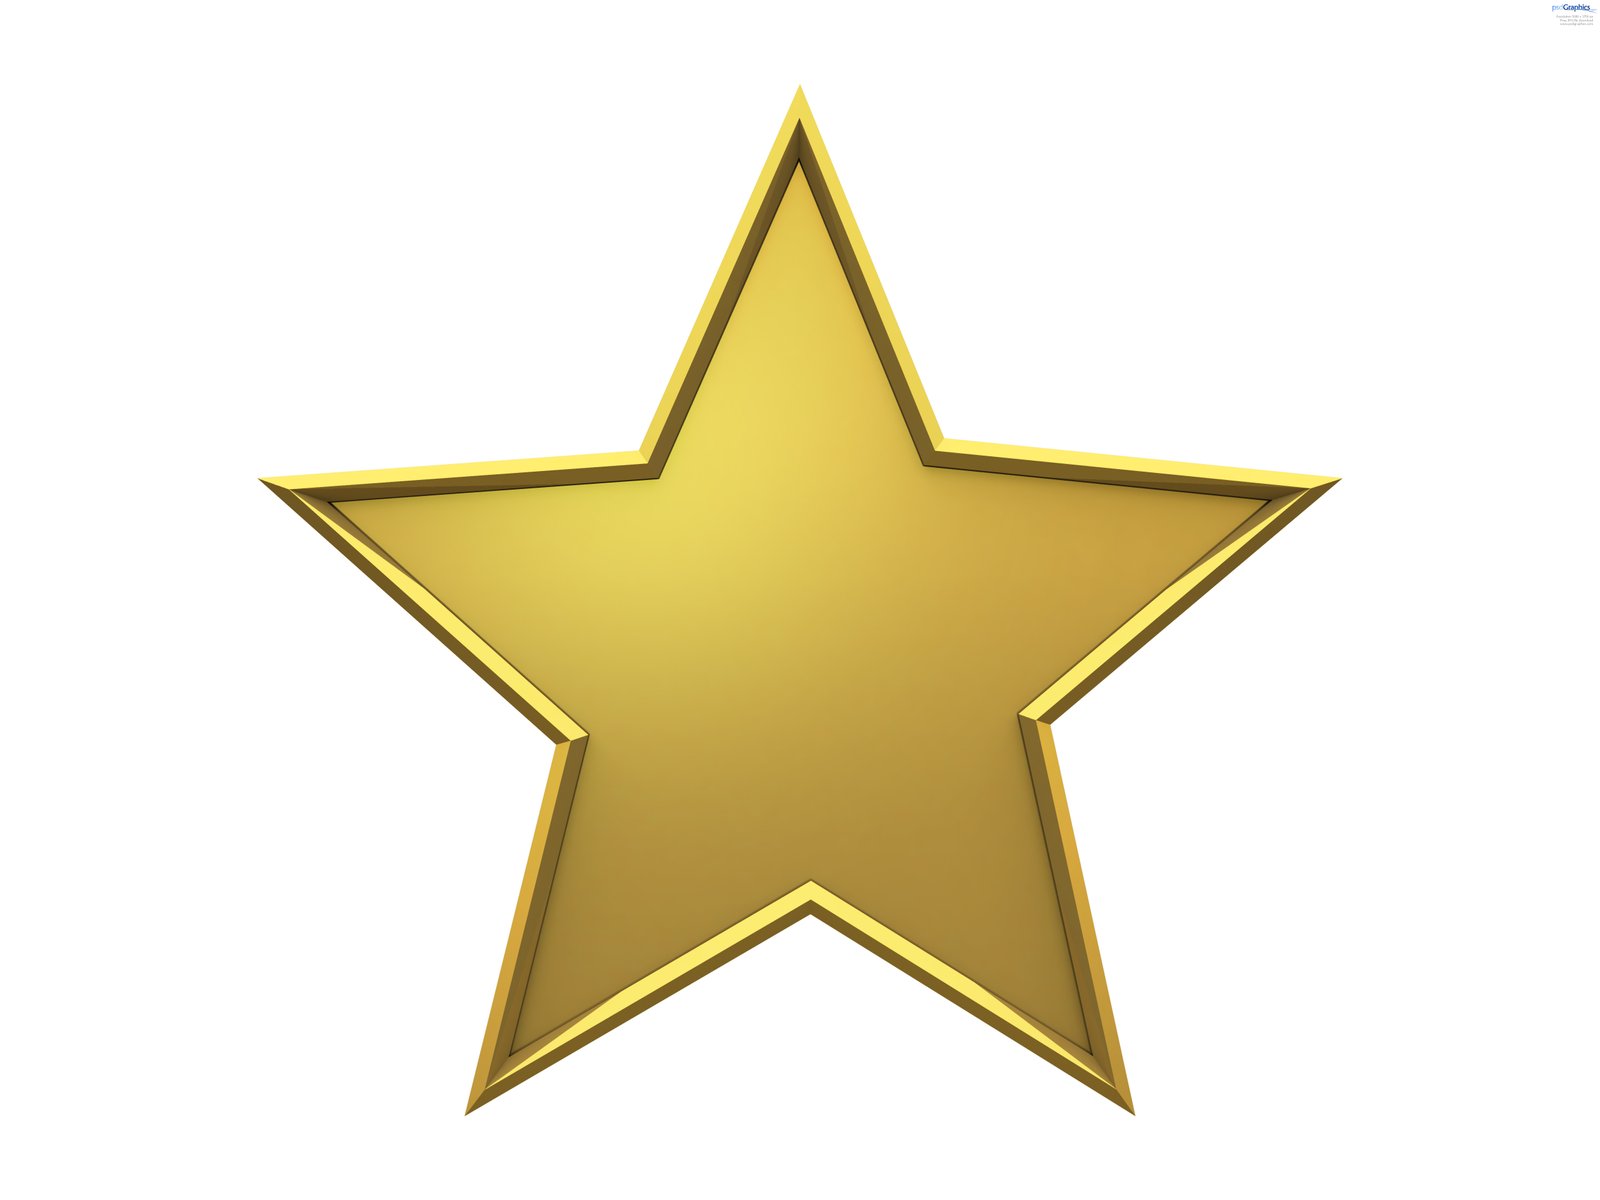 site-news-fill-in-our-reader-survey-and-we-ll-give-you-a-gold-star